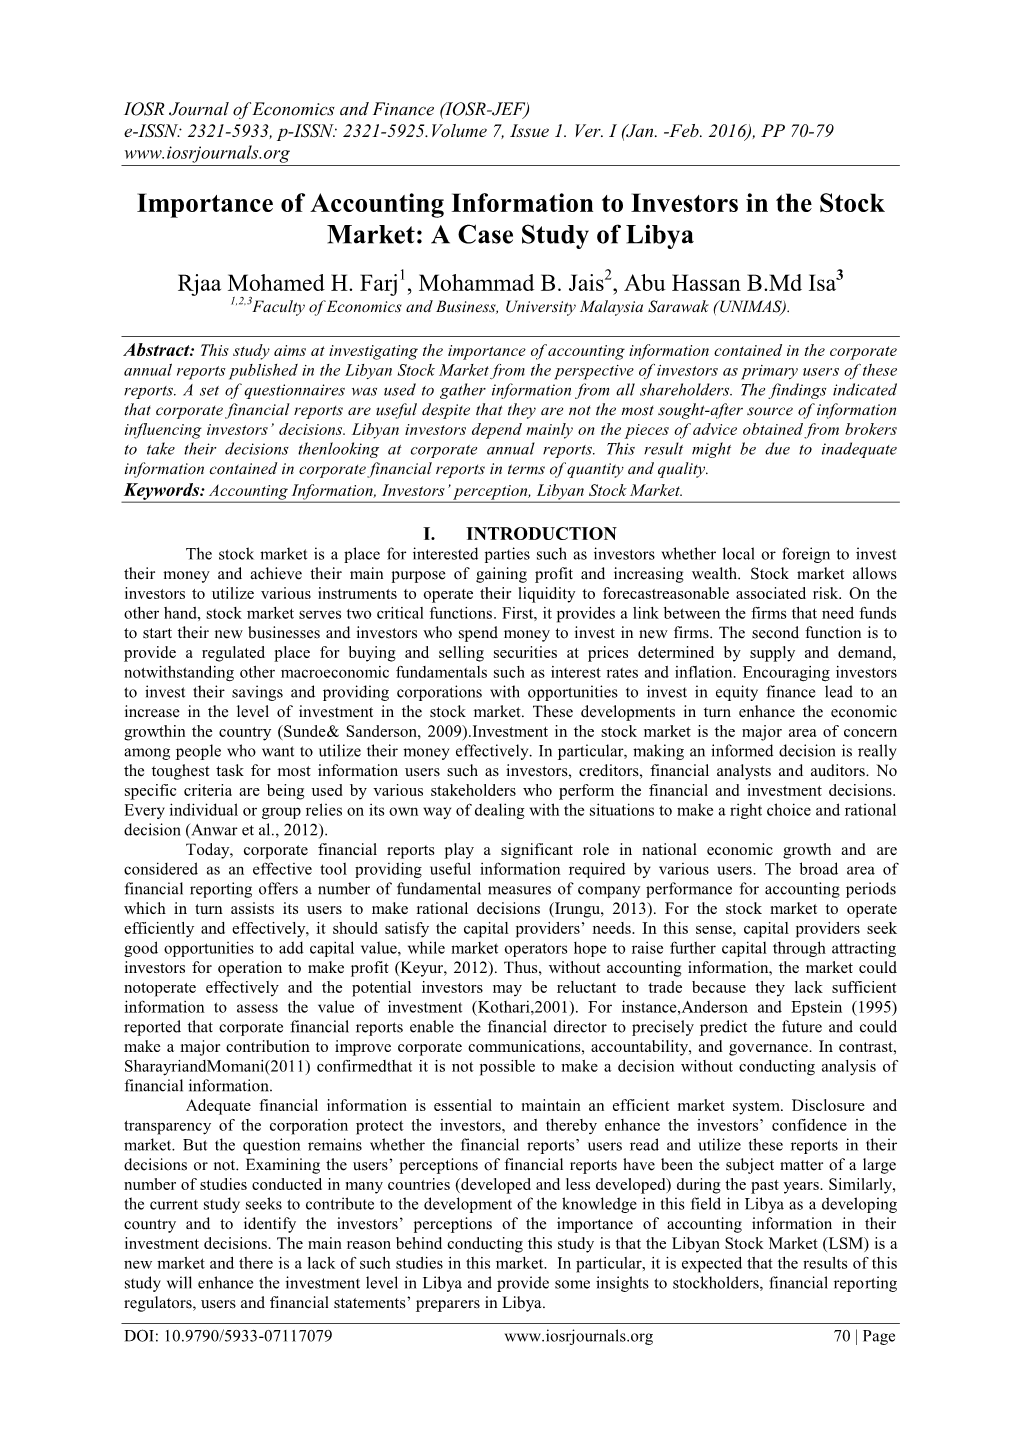 Importance of Accounting Information to Investors in the Stock Market: a Case Study of Libya